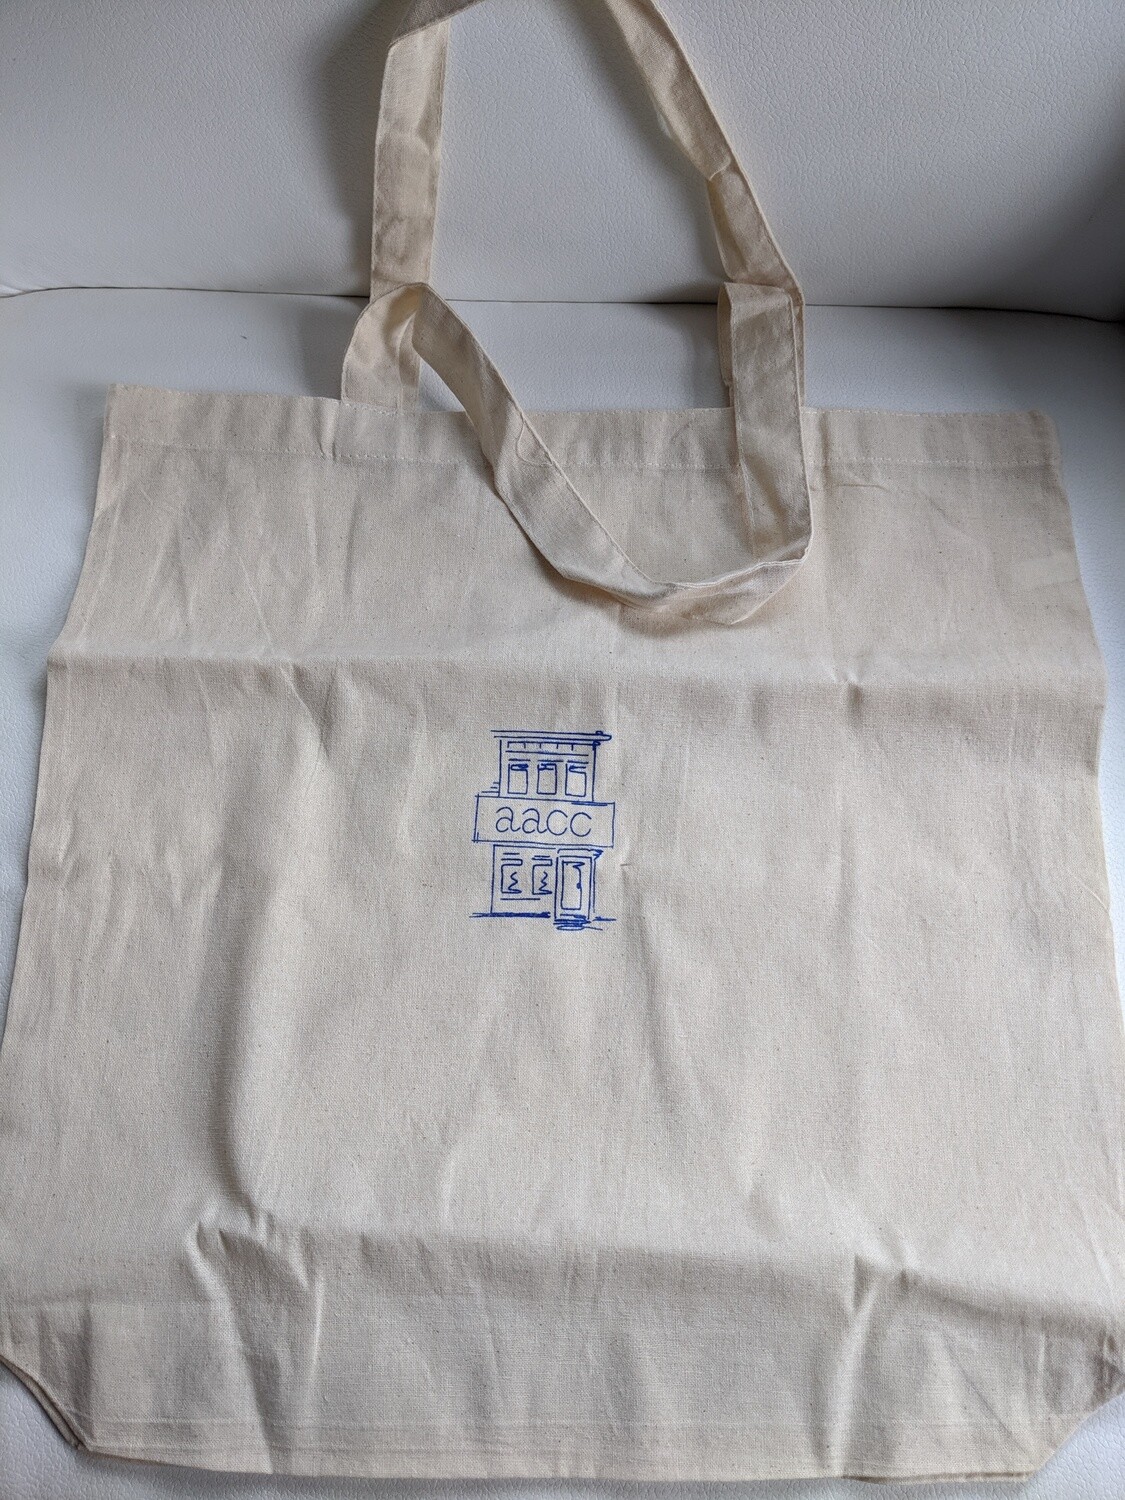 AACC Tote Bags